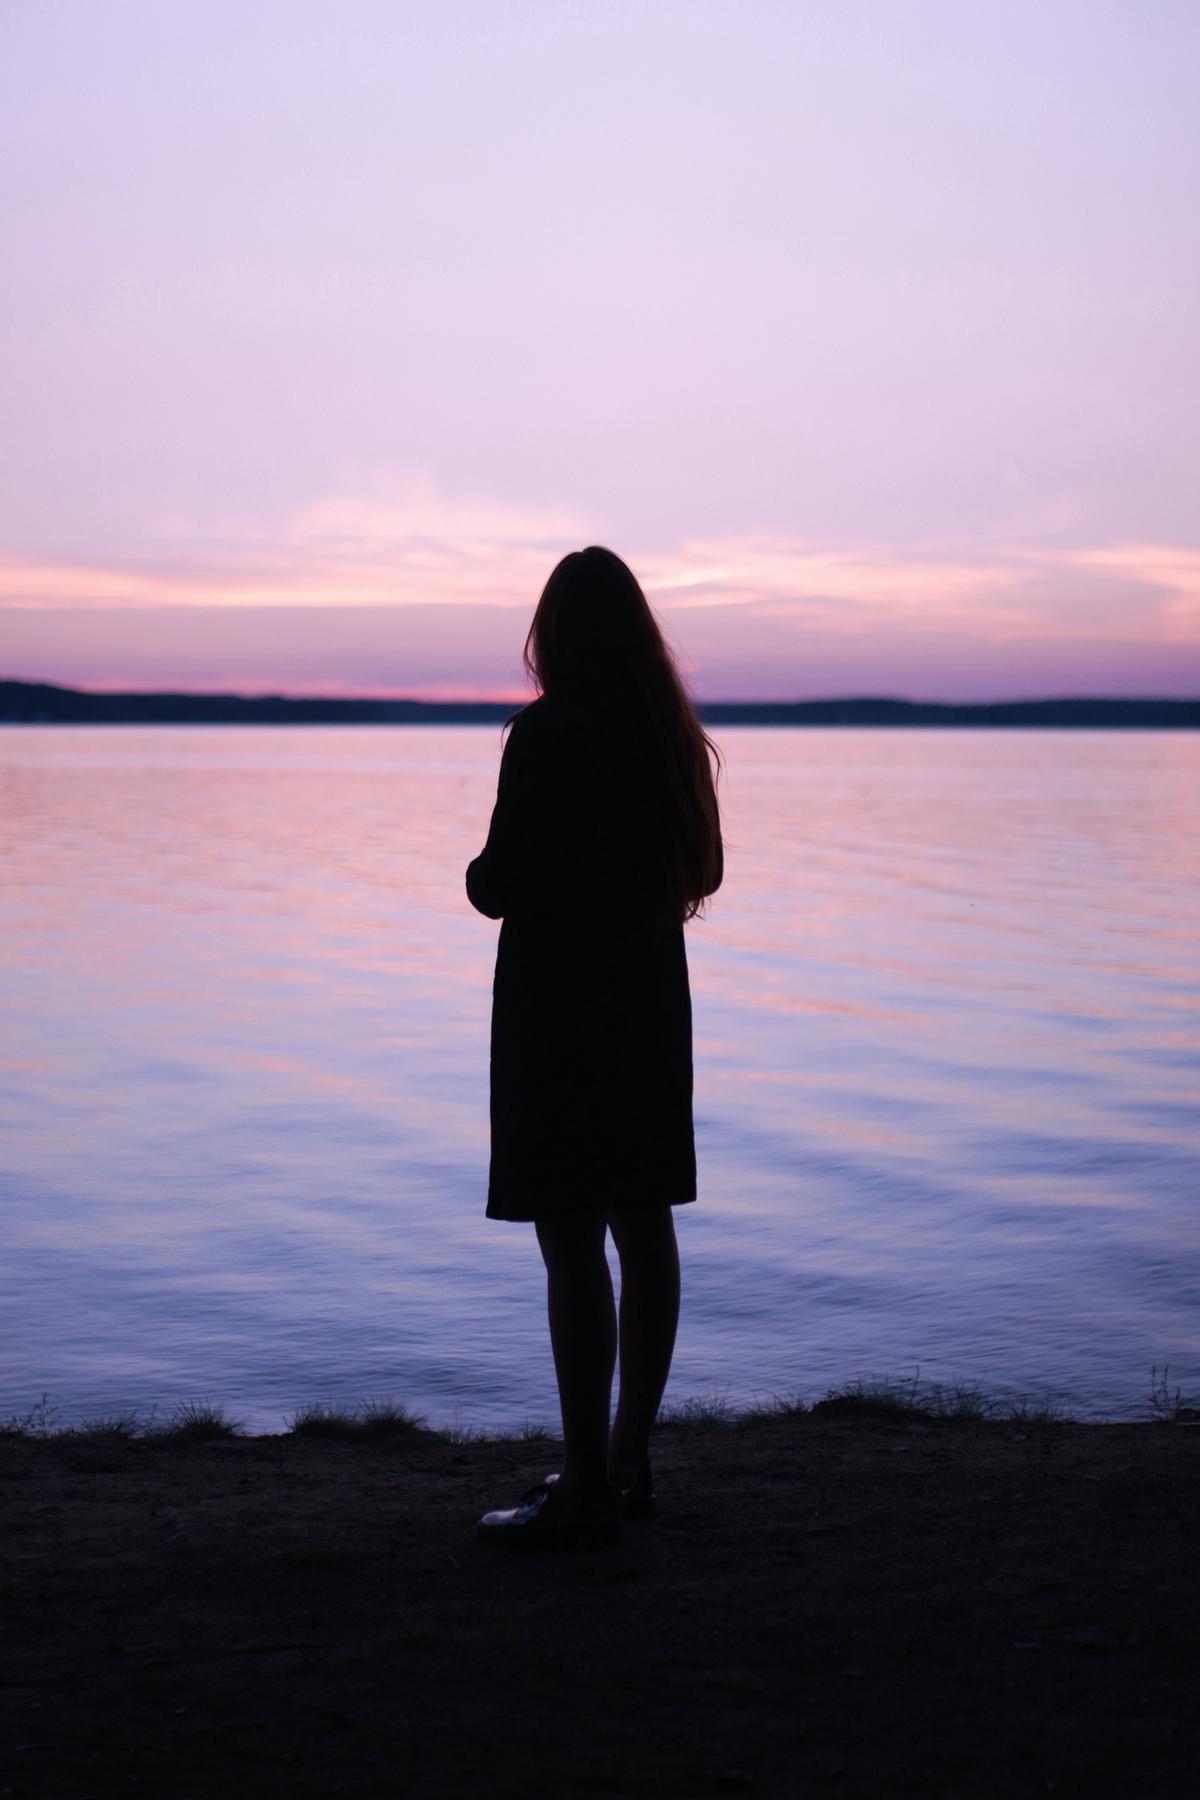 Silhouette of a person standing in front of a still purple lake